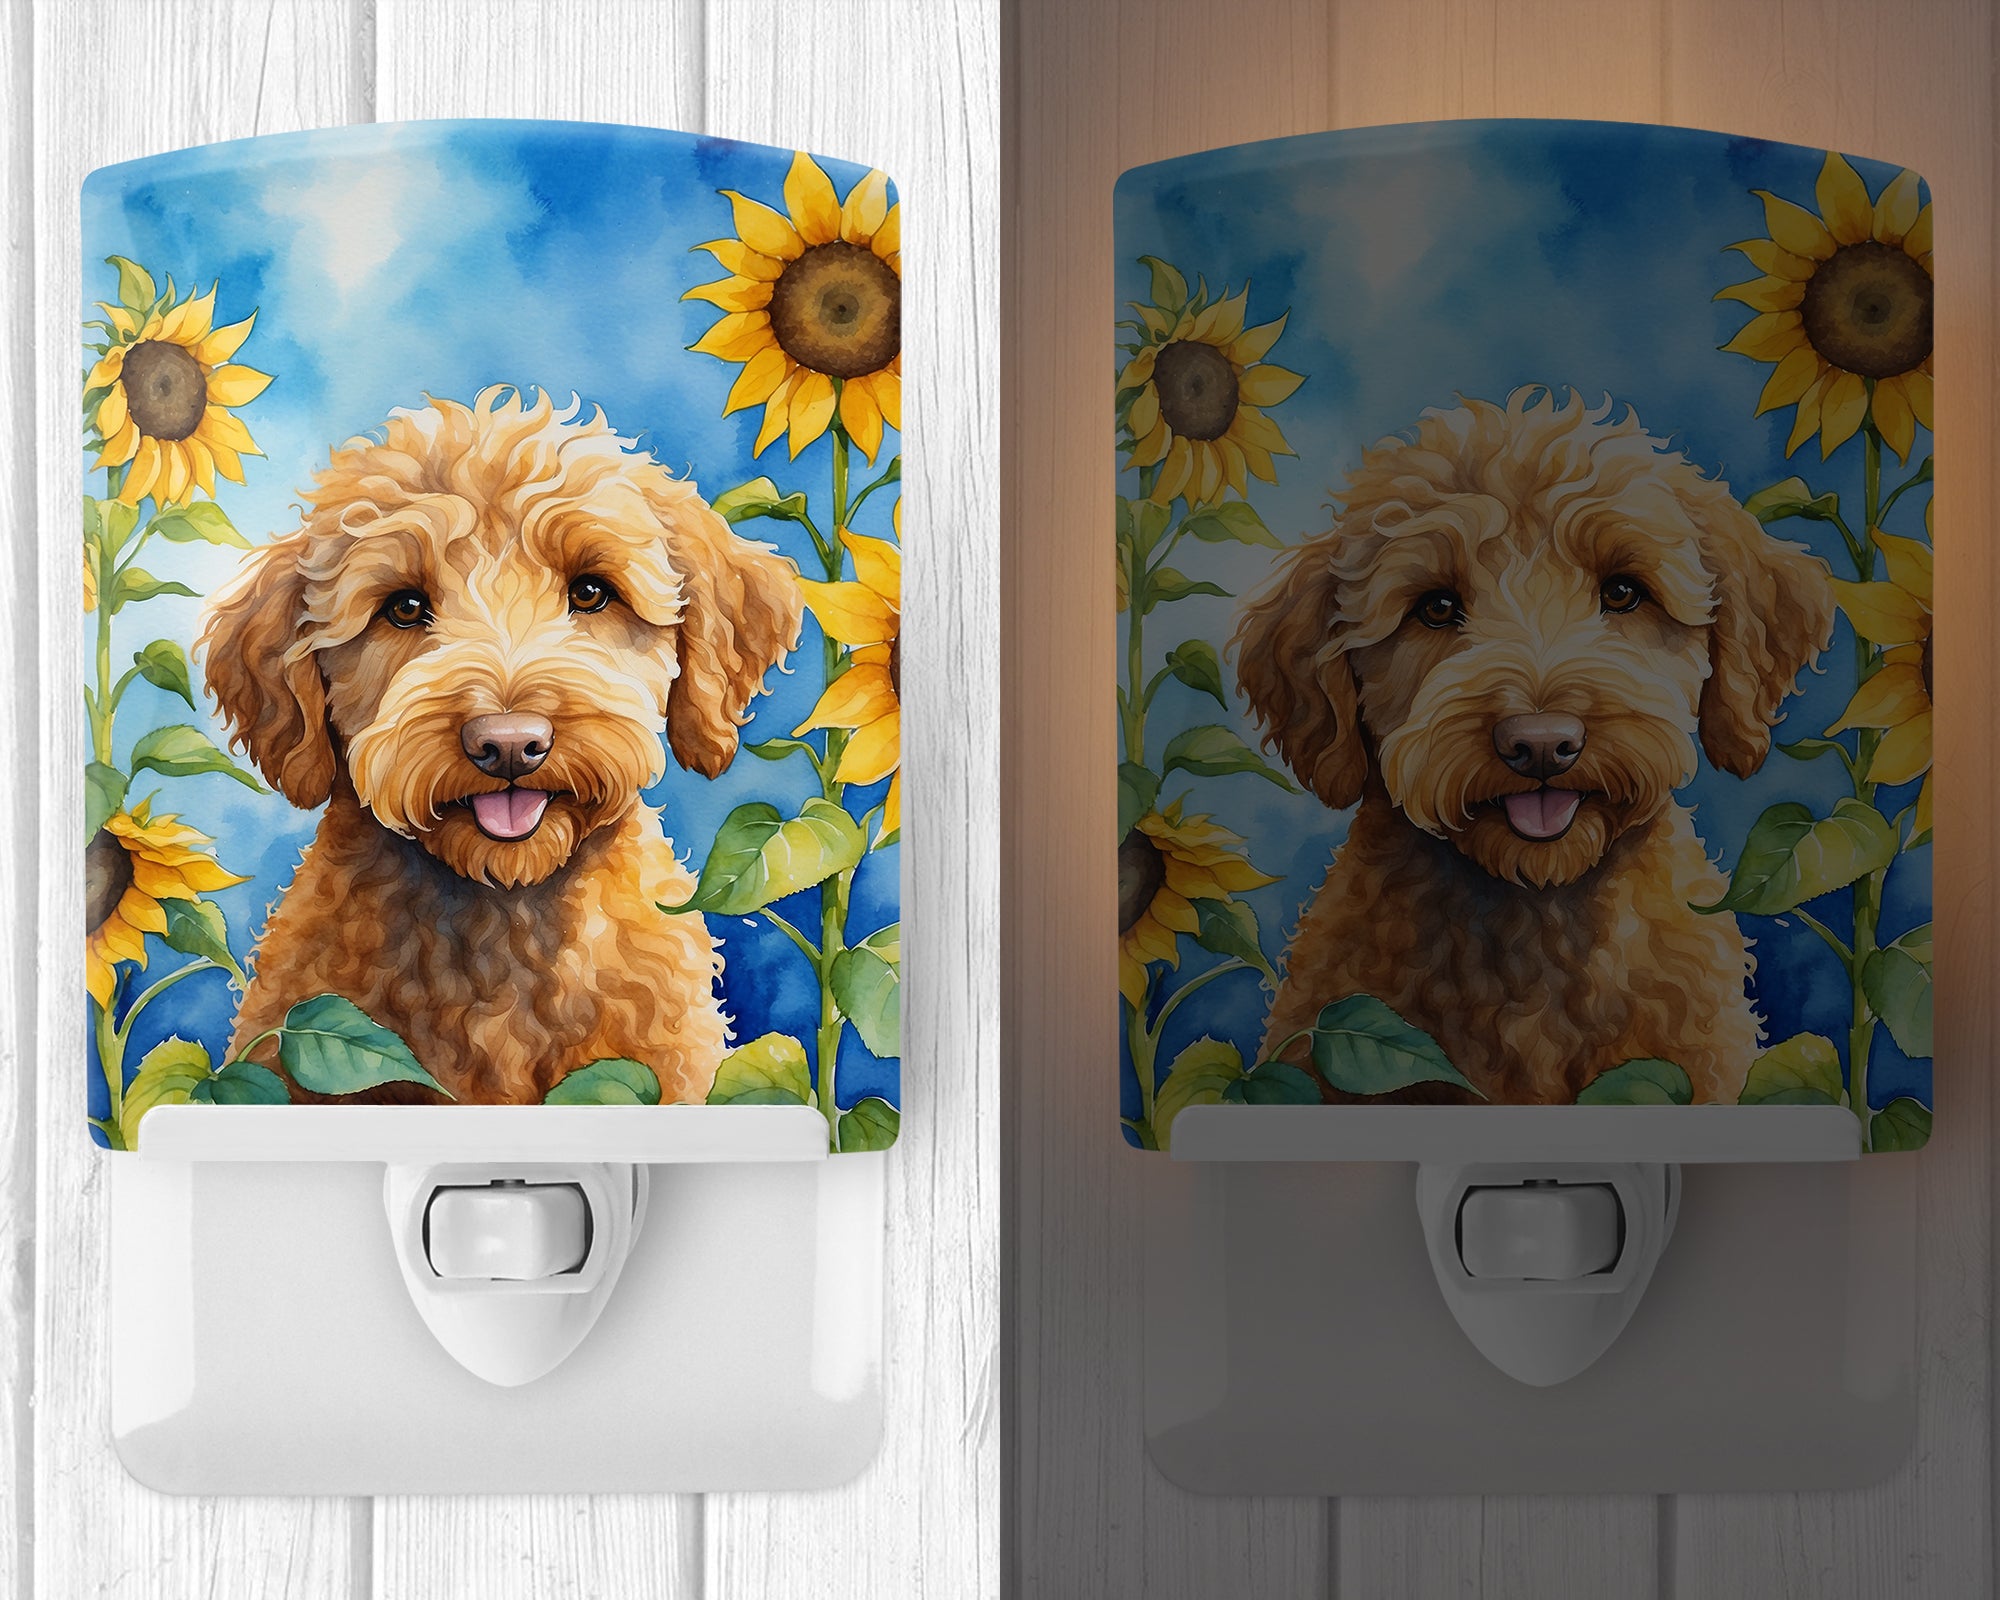 Buy this Labradoodle in Sunflowers Ceramic Night Light